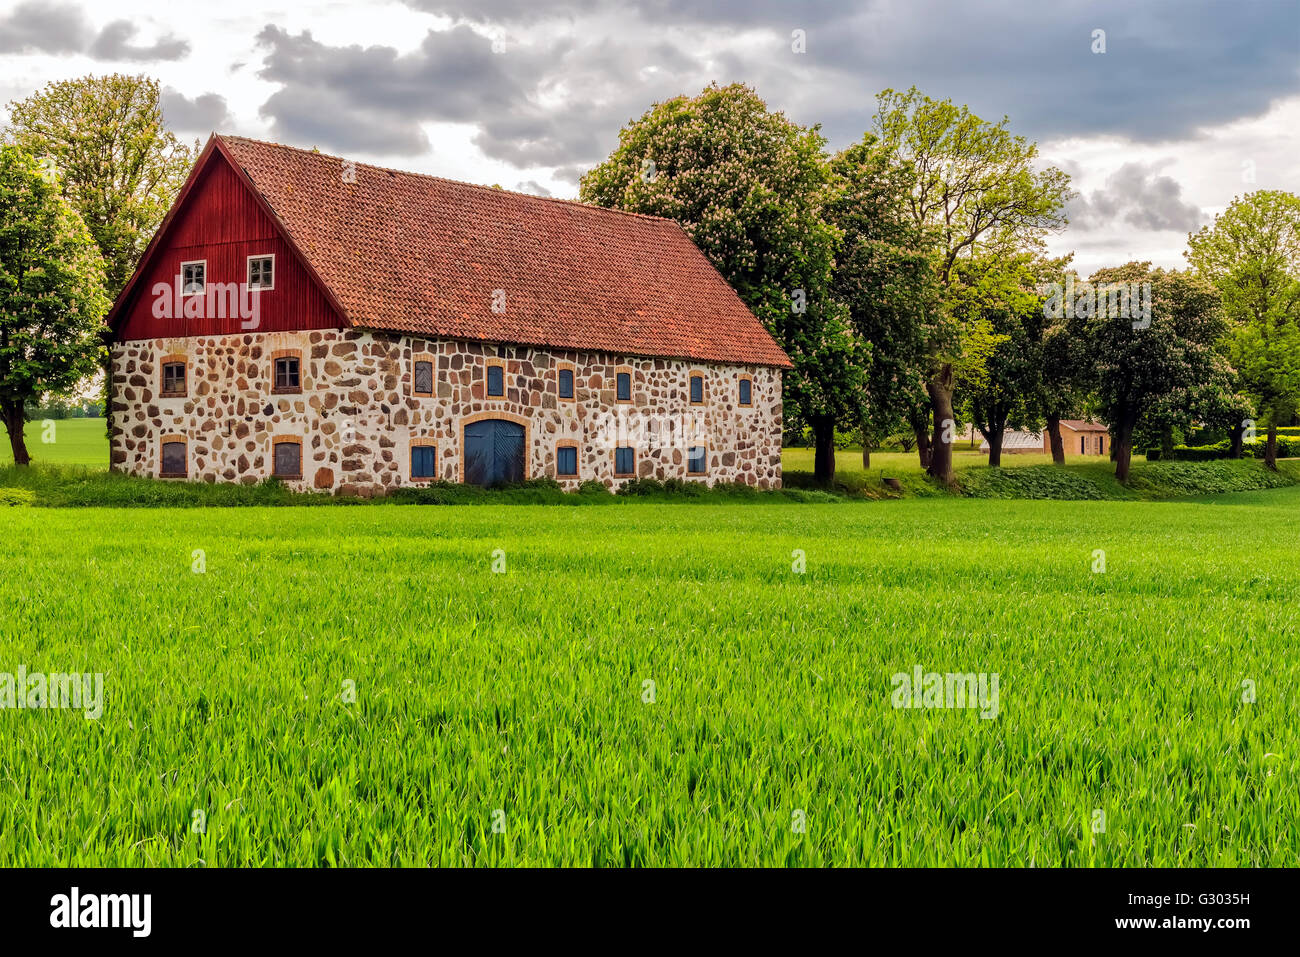 An old stone barn with wooden roof set in the rural countryside of Swedens Skane region. Stock Photo